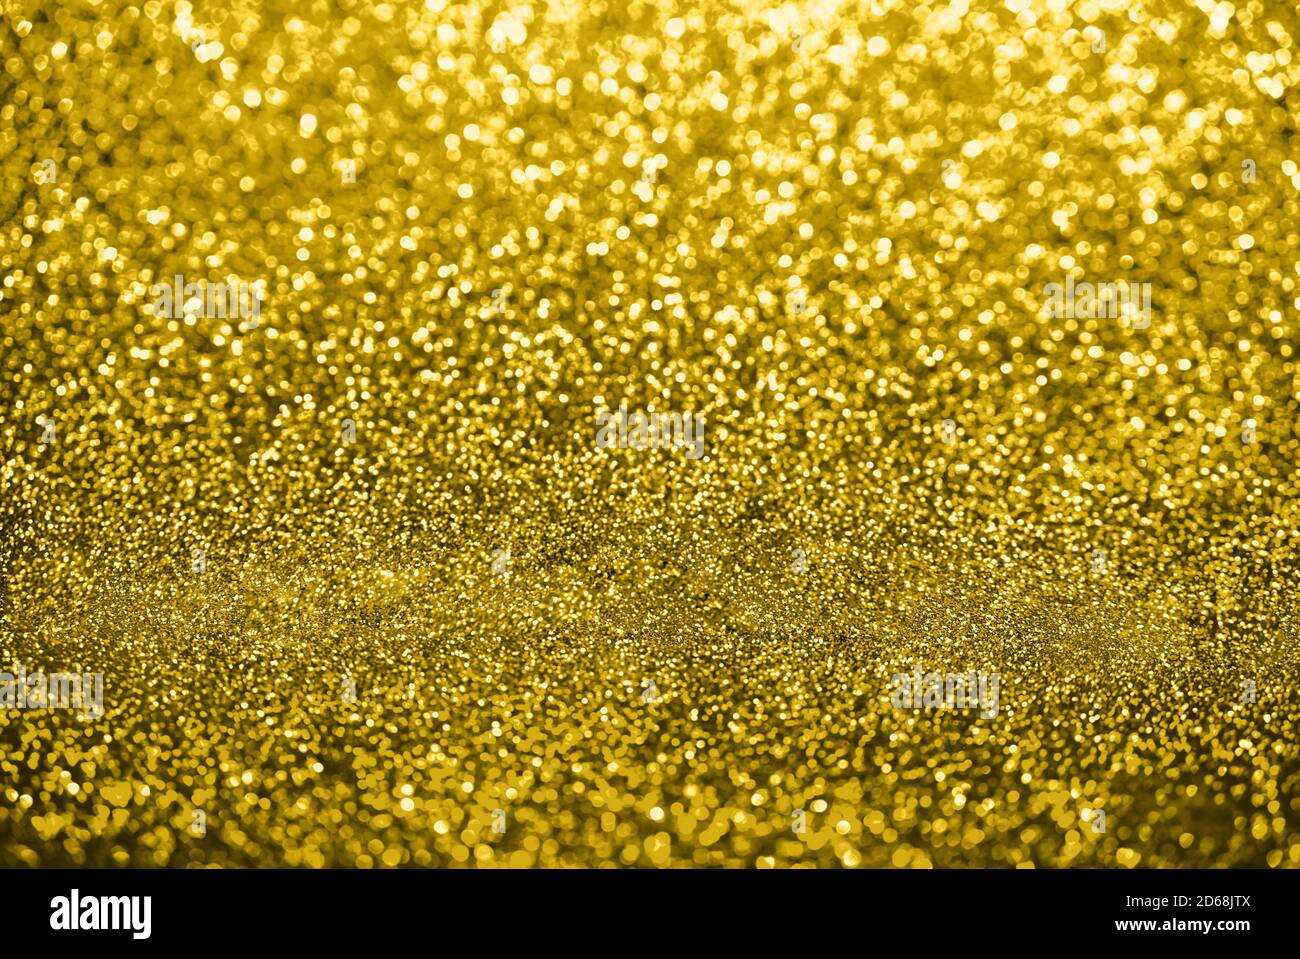 Yellow bokeh background.Christmas, New Year's eve, party, celebration concept. Illuminating color. Stock Photo